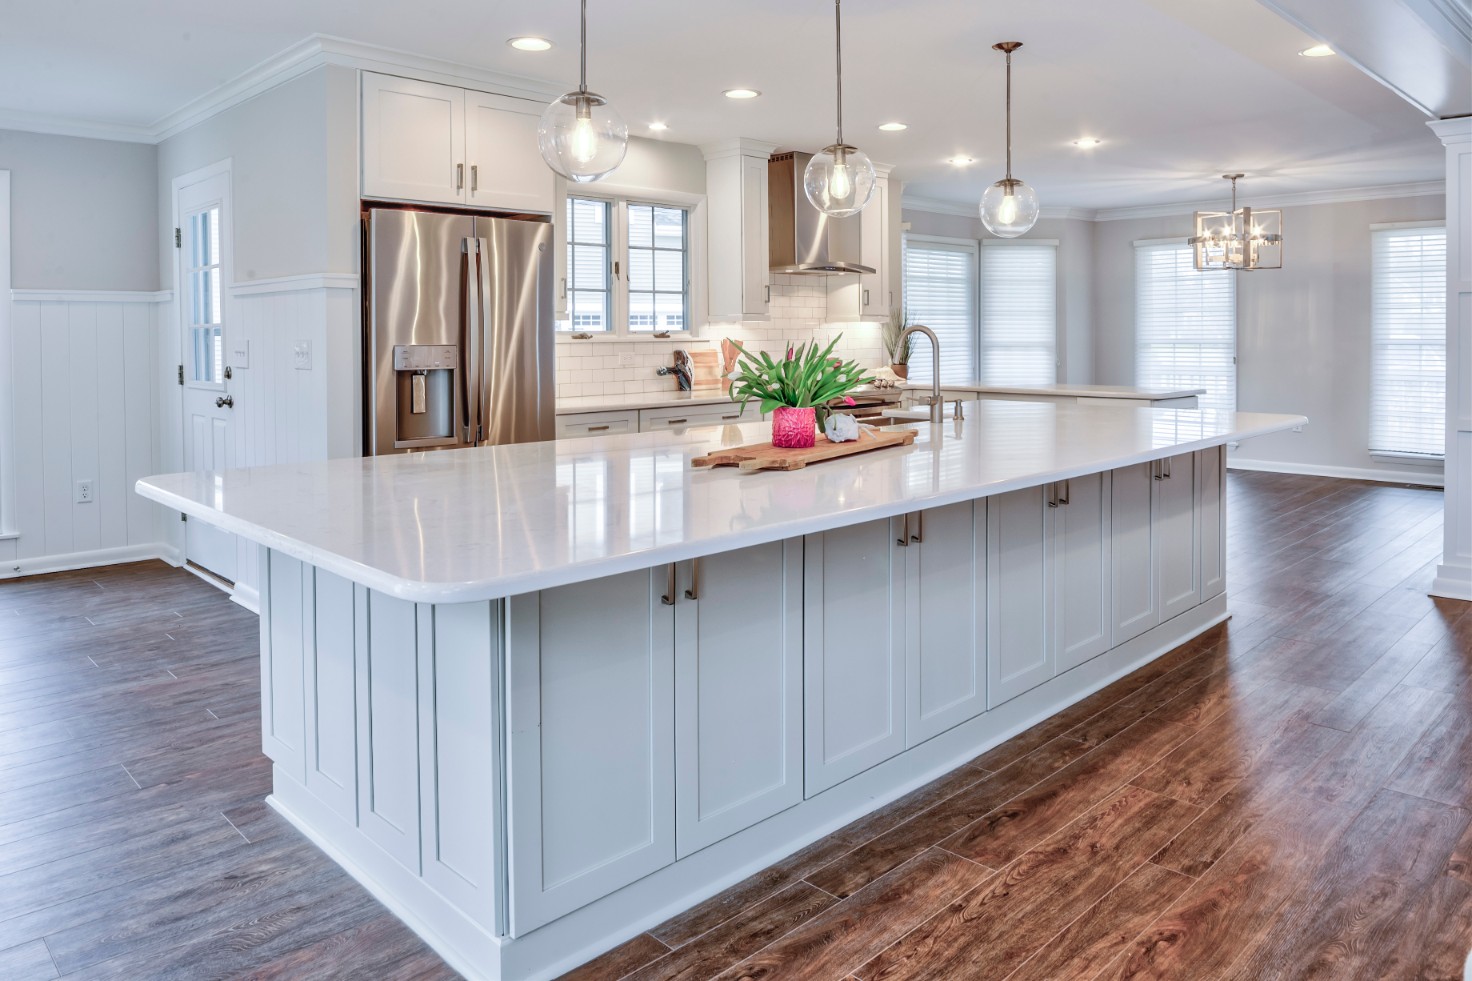 Canal Way Kitchen Remodel in Bethany Beach DE with Center Island with White Shaker Cabinets